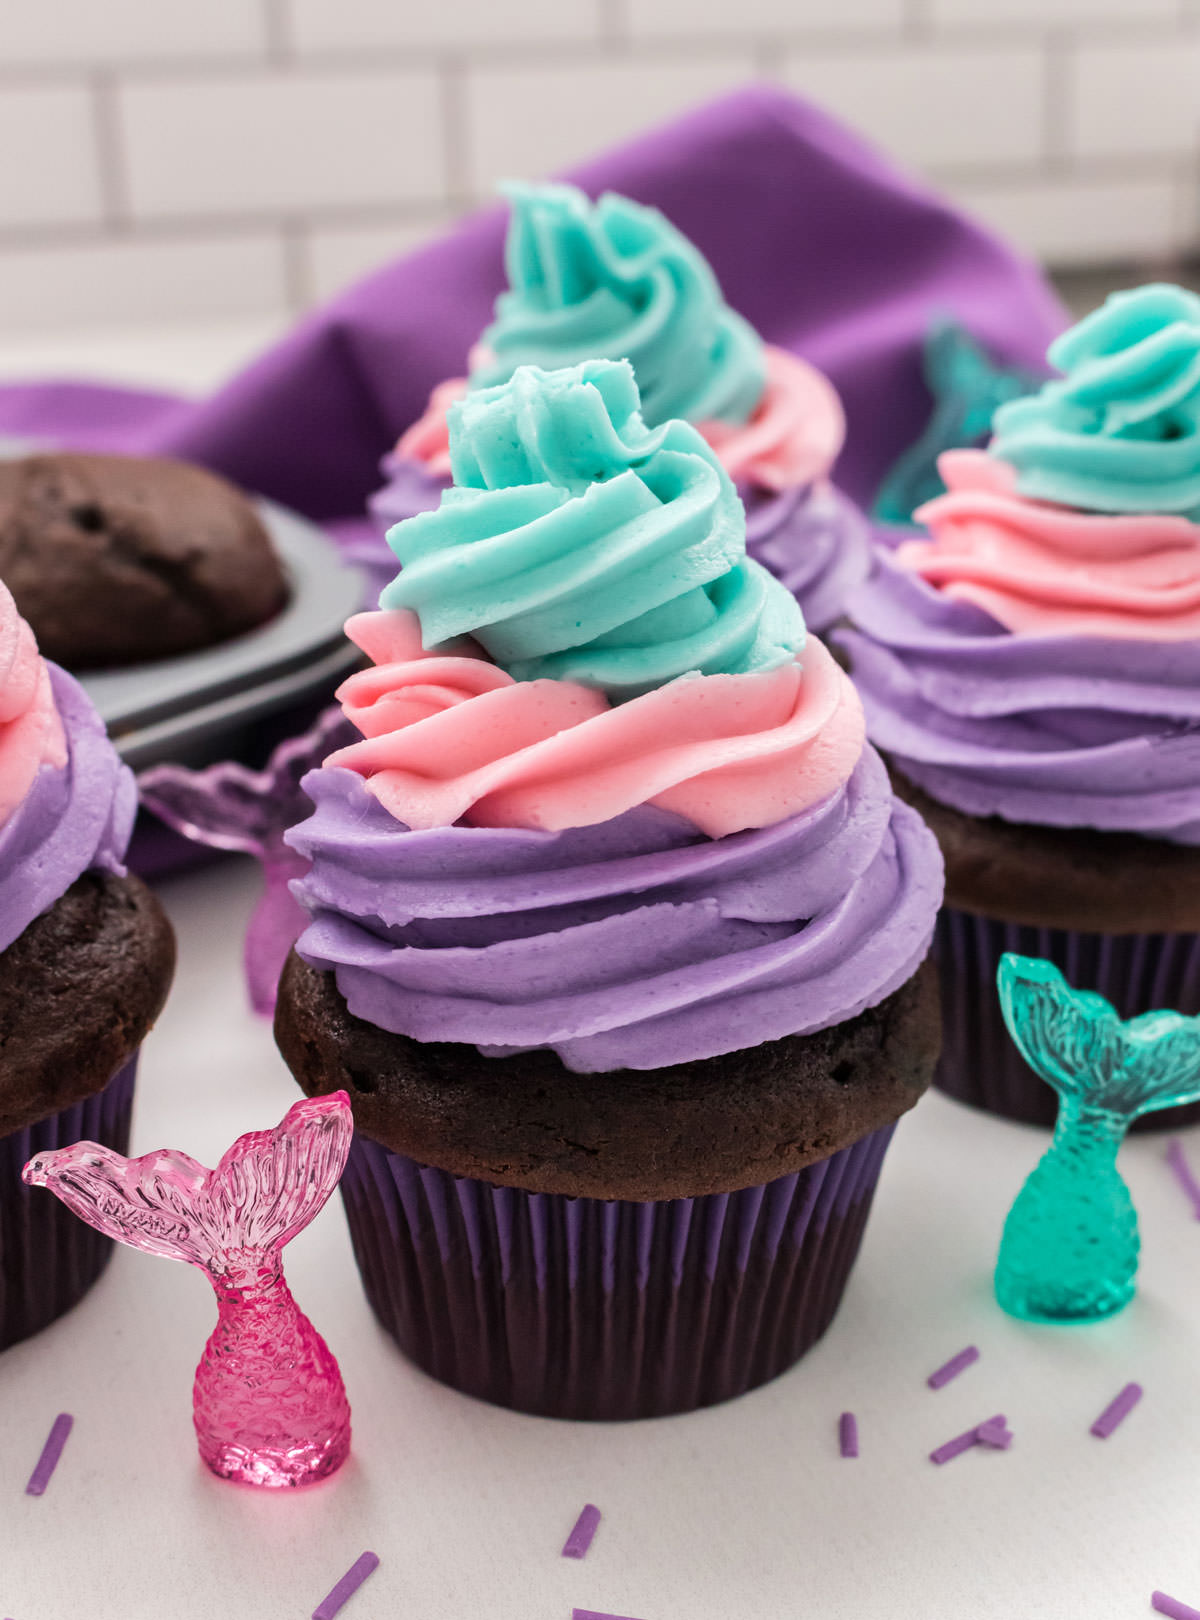 Closeup on three Mermaid Cupcakes sitting on a white table with colored Mermaid Tails surrounding it.